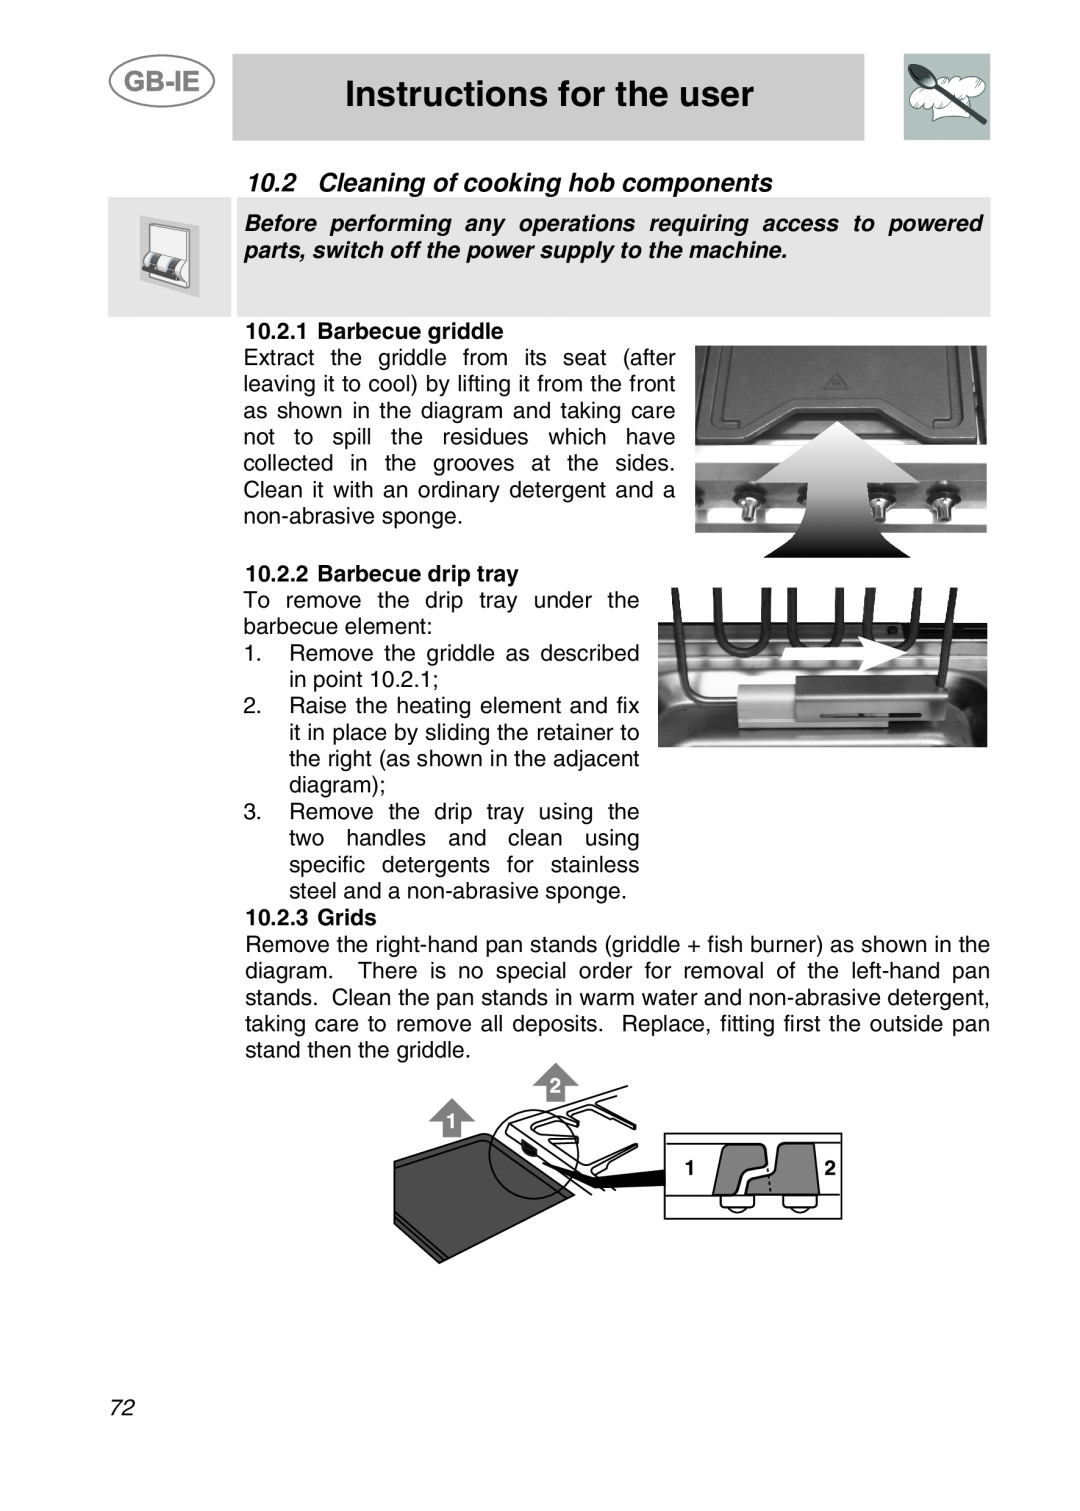 Smeg CS120-6 Cleaning of cooking hob components, Instructions for the user, Barbecue griddle, Barbecue drip tray, Grids 